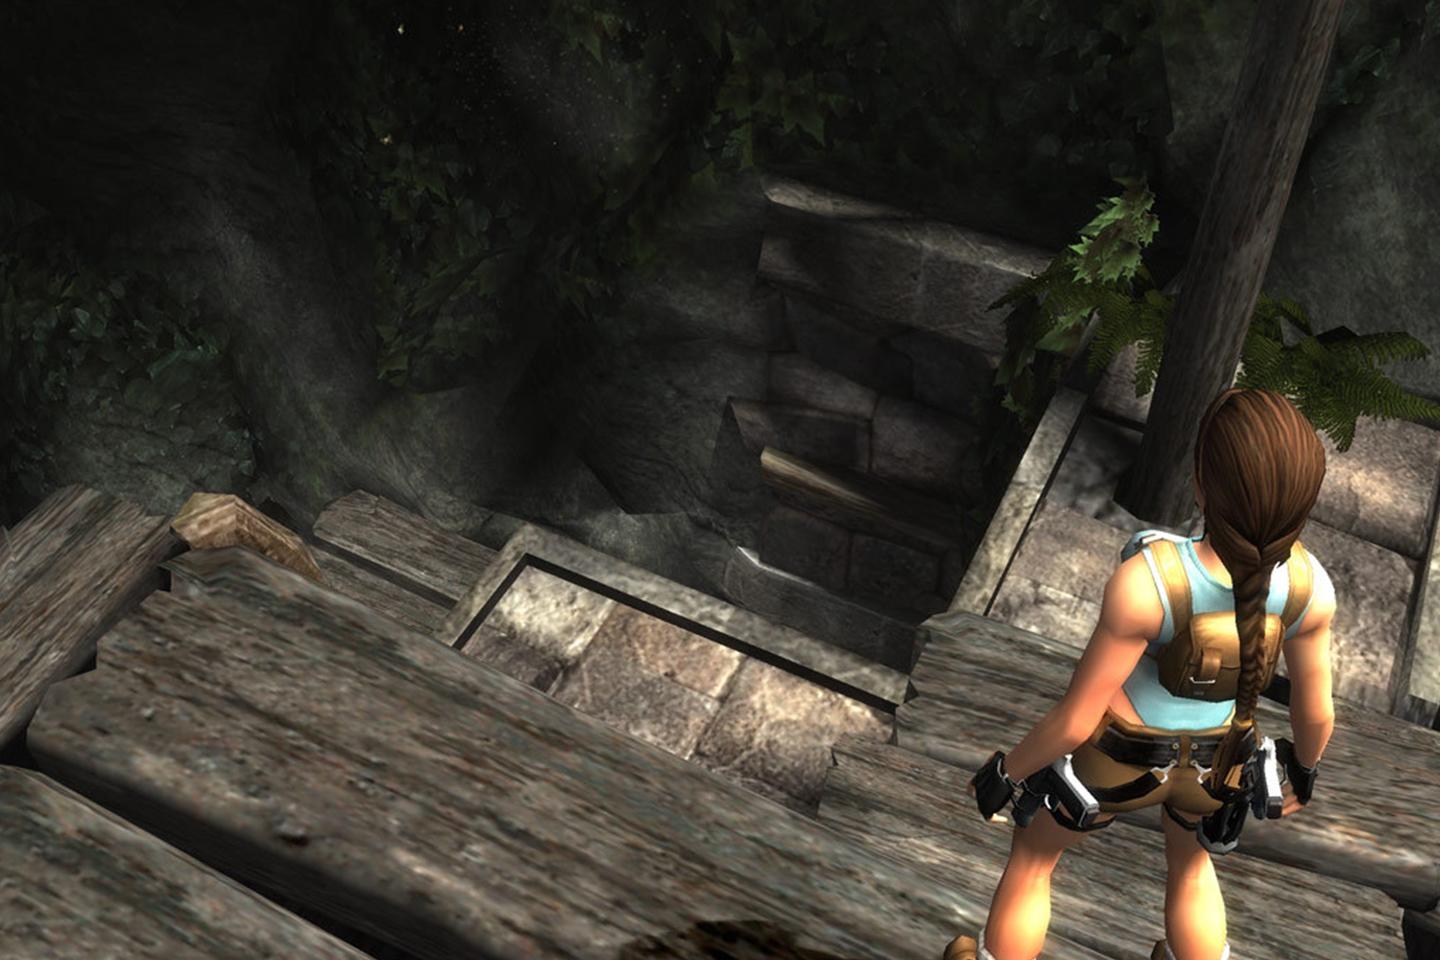 Lara looking out over dark staircase inside of stone tomb.